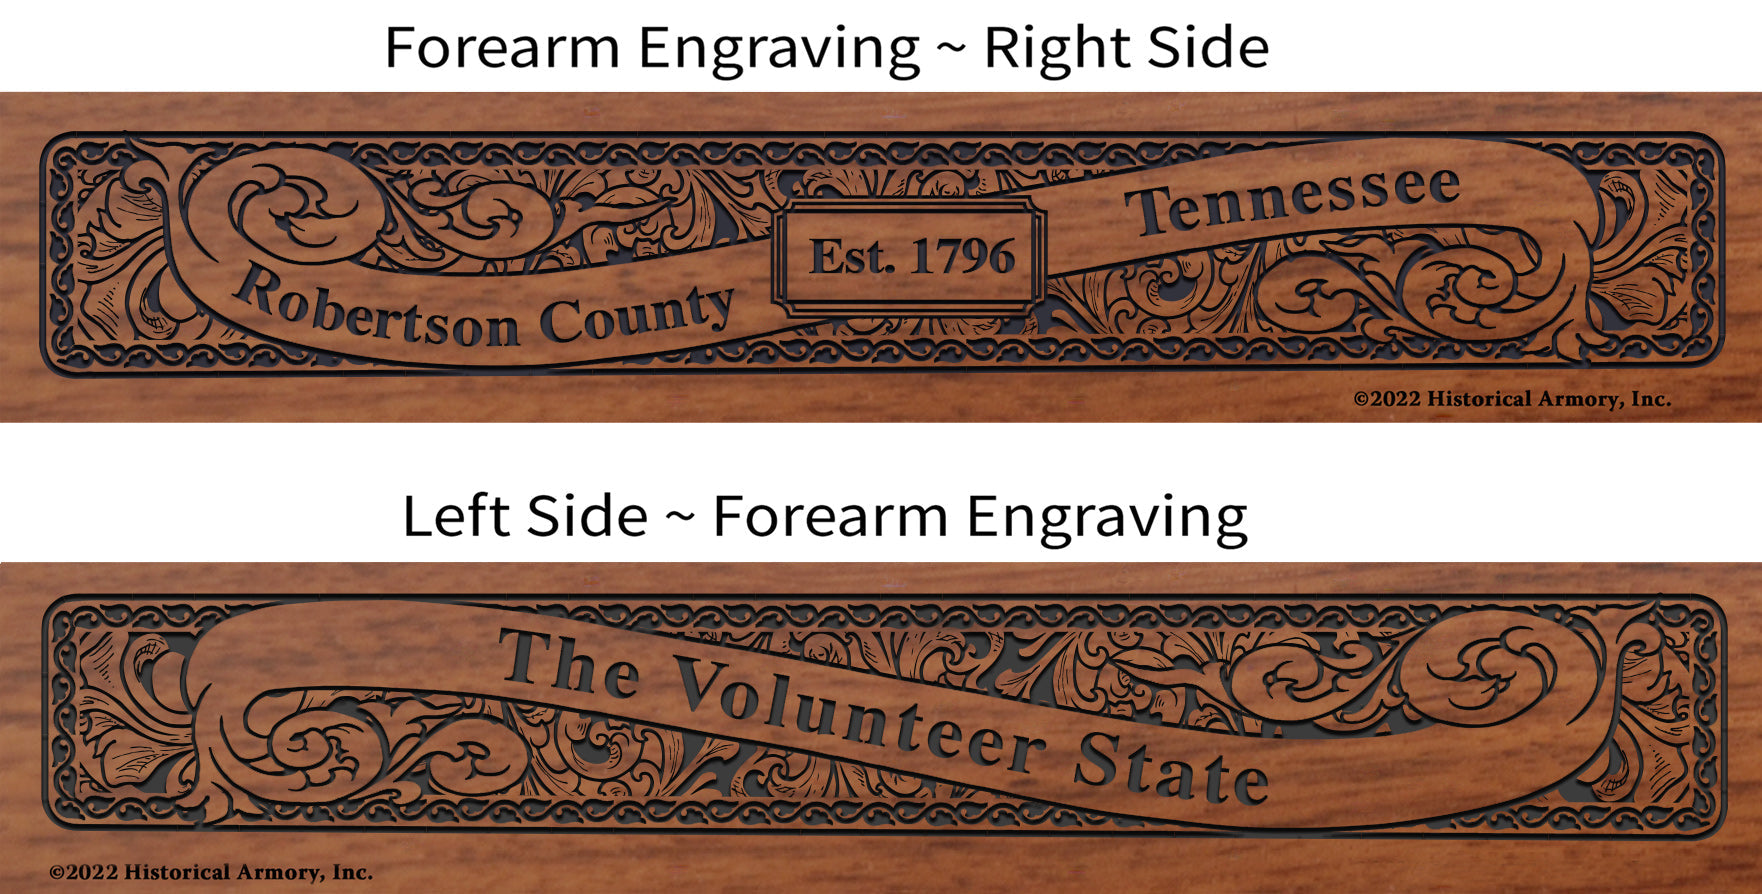 Robertson County Tennessee Engraved Rifle Forearm